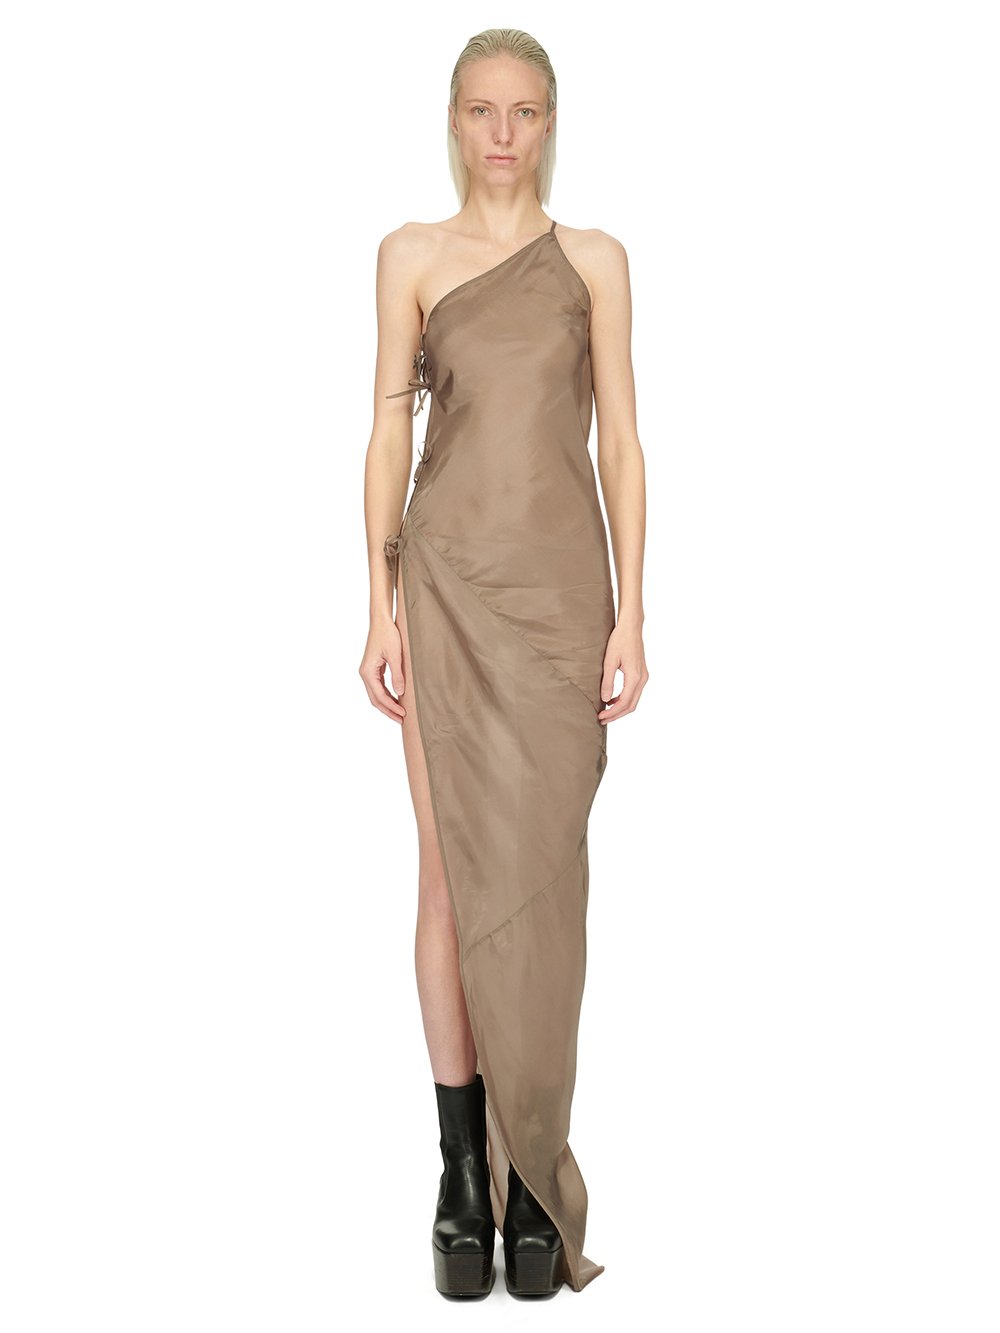 RICK OWENS FW23 LUXOR TACO GOWN IN DUST GREY CUPRO JAPONETTE